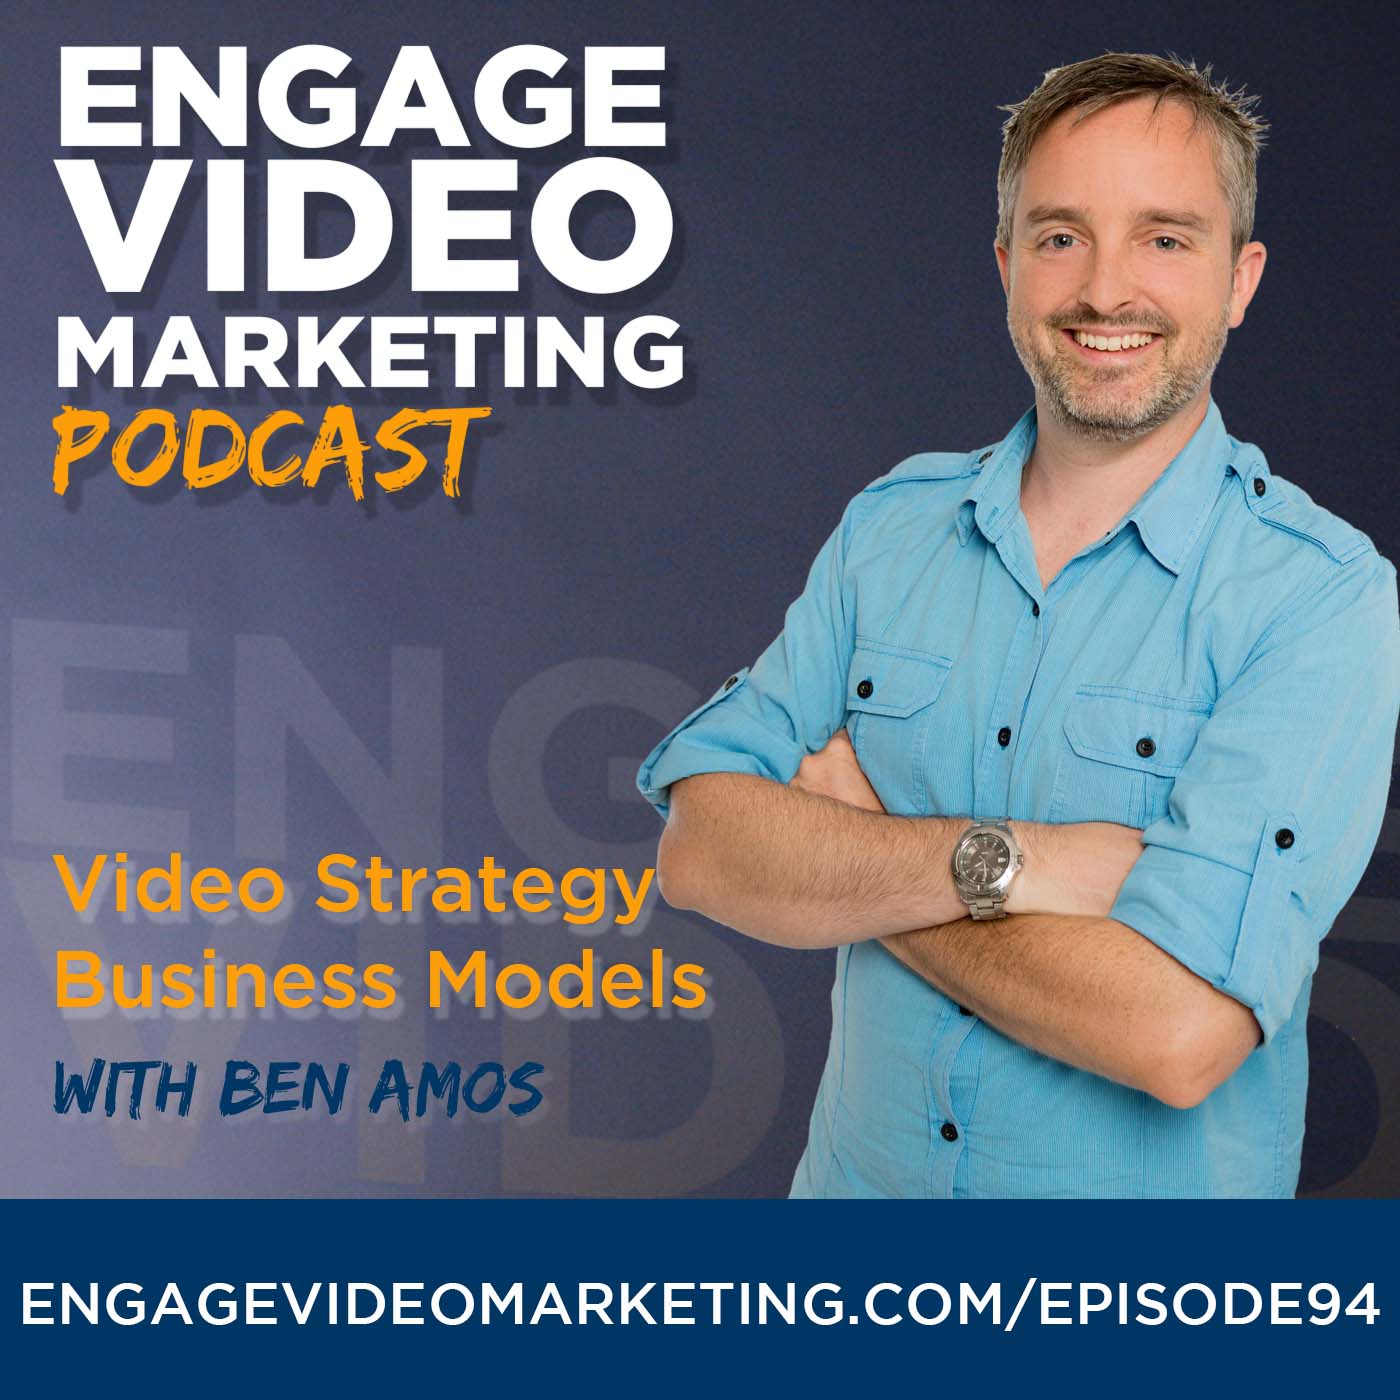 Video Strategy Business Models